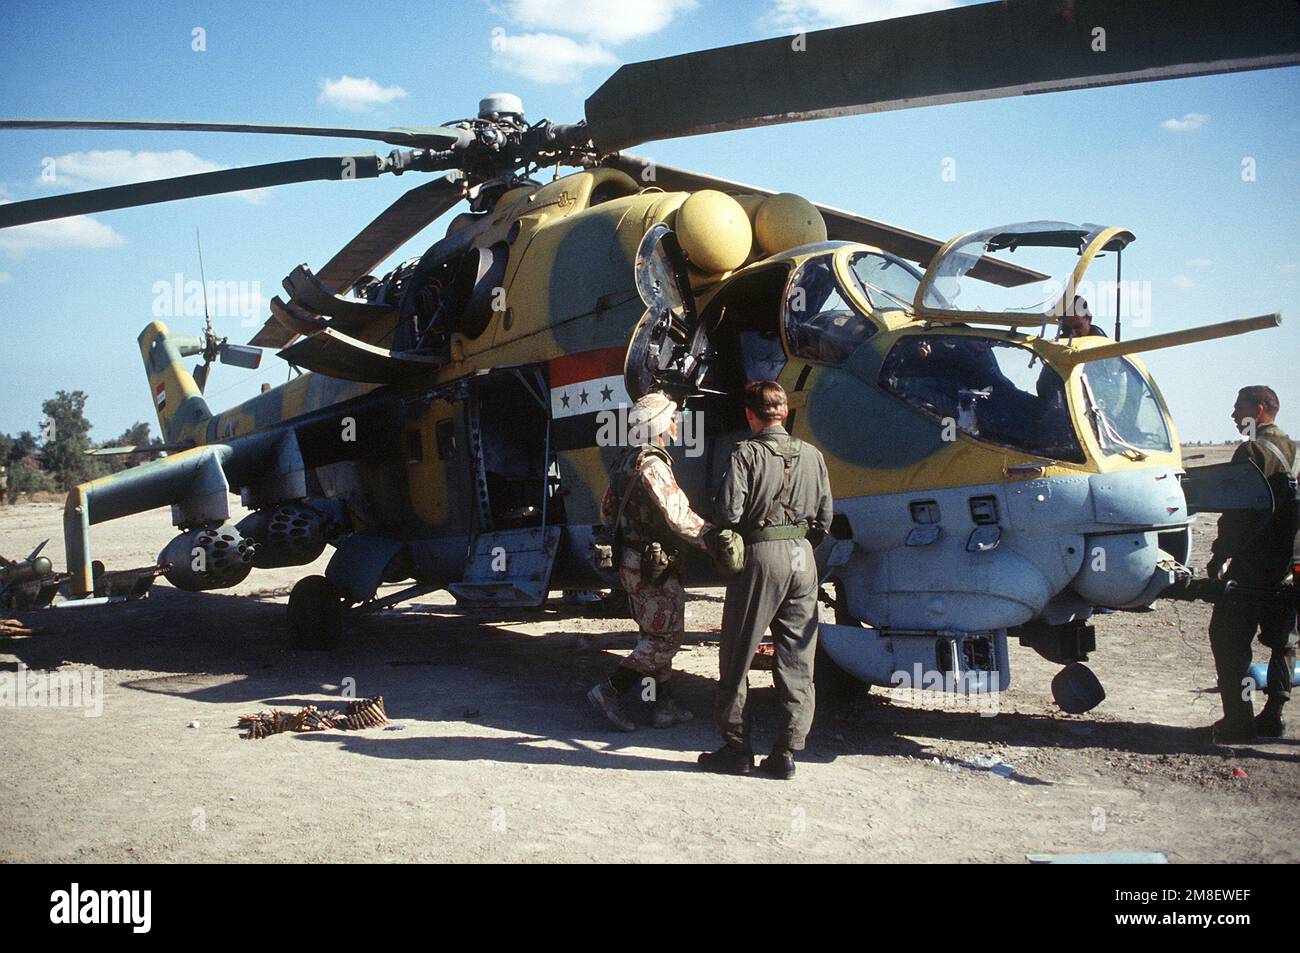 Members of the 82nd Airborne Division inspect an Iraqi MIL Mi-24 Hind-D assault helicopter abandoned during Operation Desert Storm.. Subject Operation/Series: DESERT STORM Country: Iraq(IRQ) Stock Photo